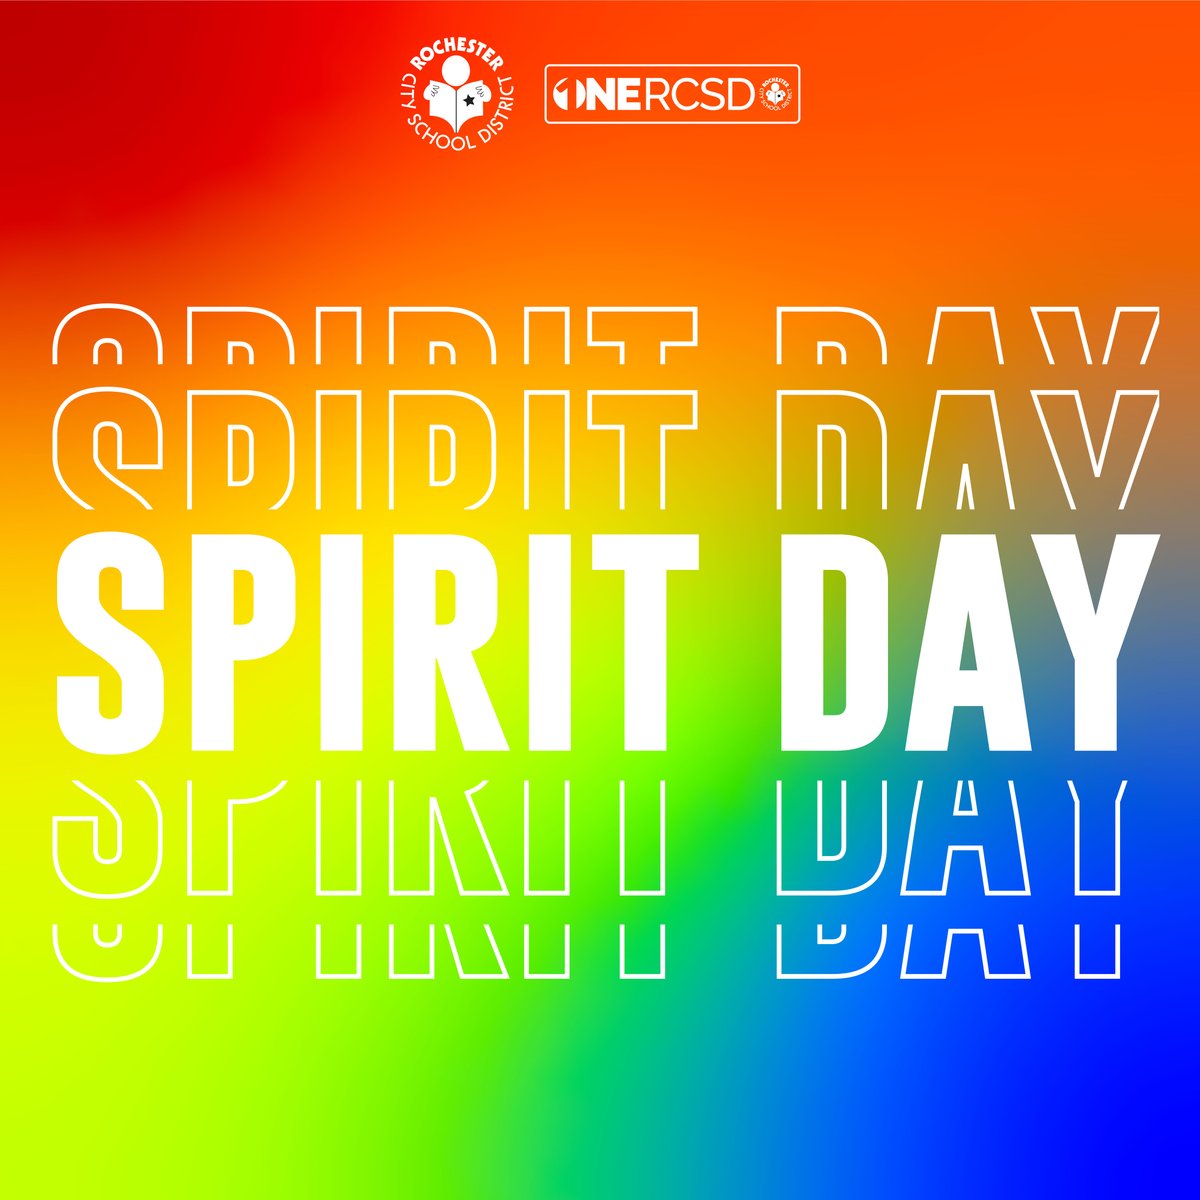 On this Spirit Day, we want to tell our LGBTQ+ students and staff that you are loved! Love is Love! #ONERCSD